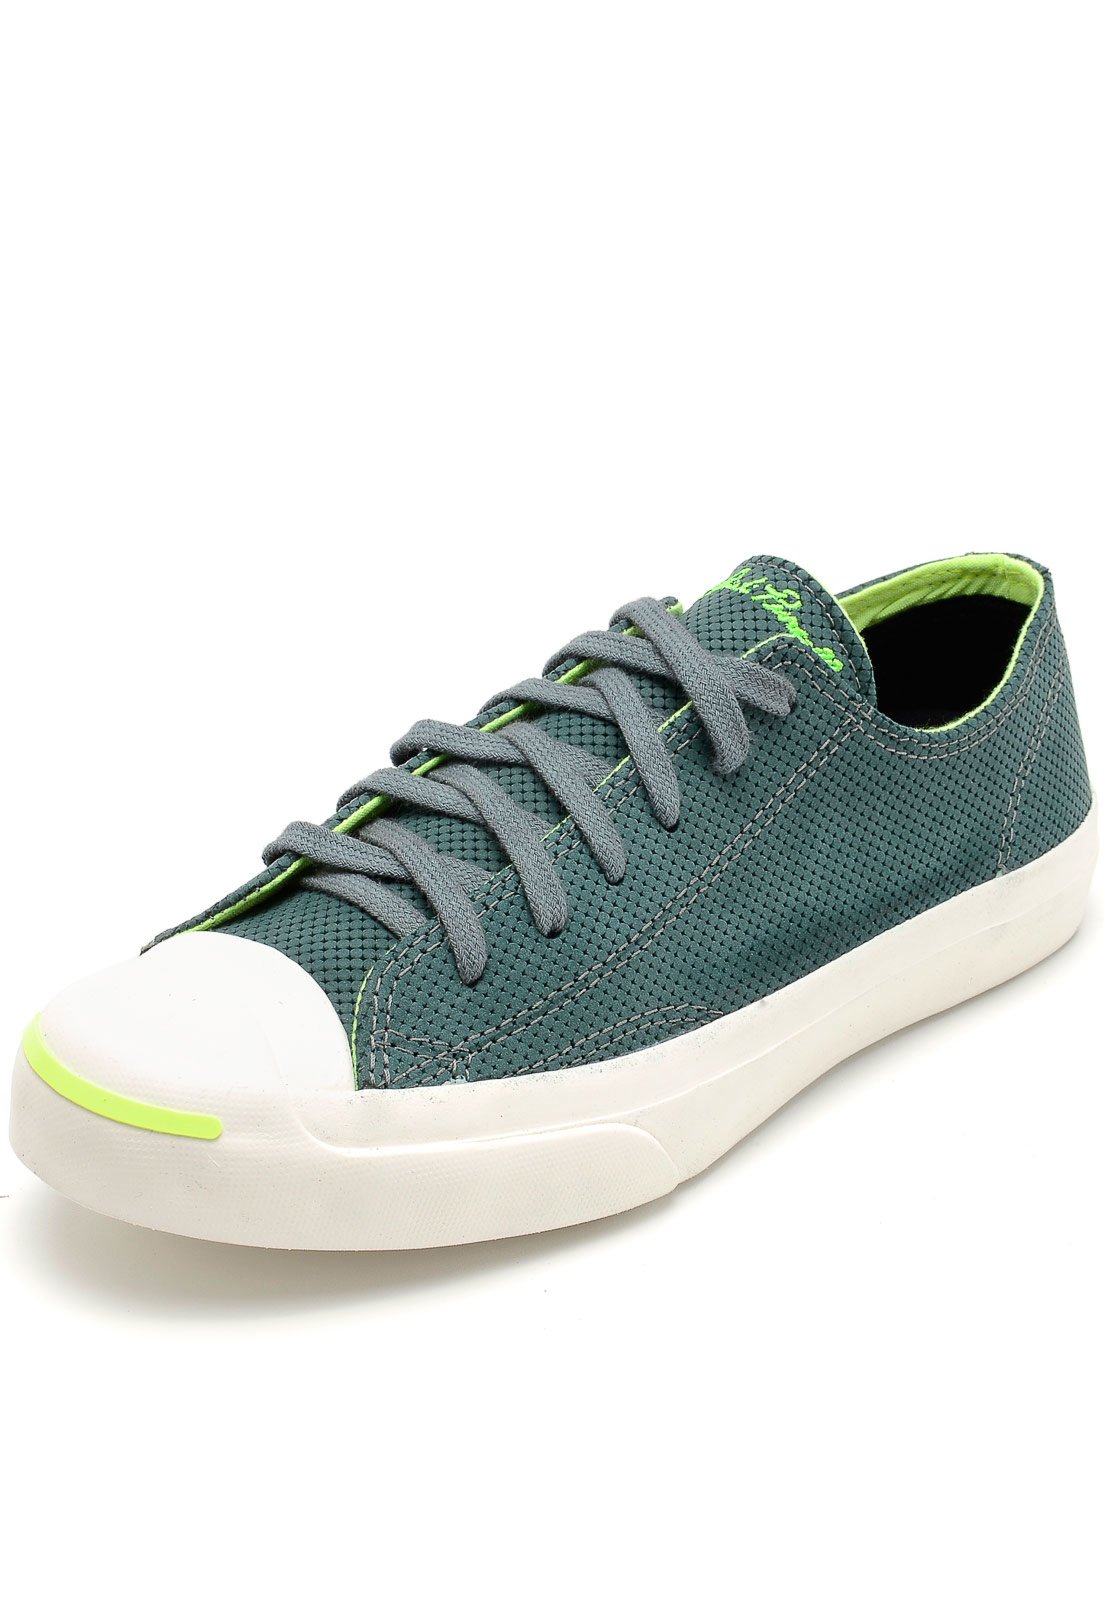 tenis converse jack purcell